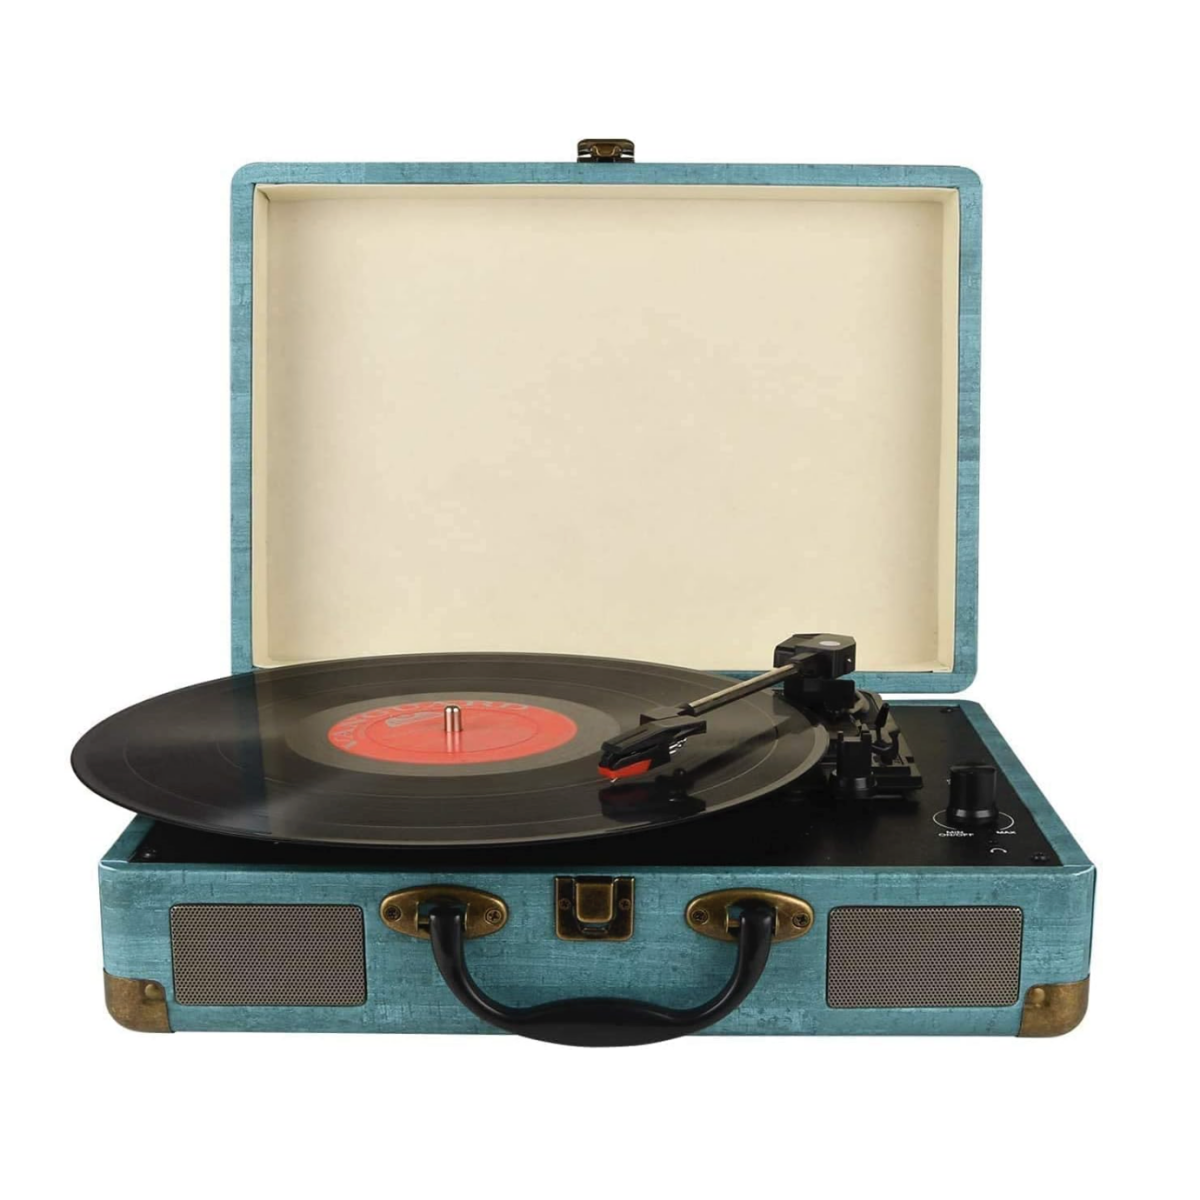 A blue Kedok Suitcase Record Player